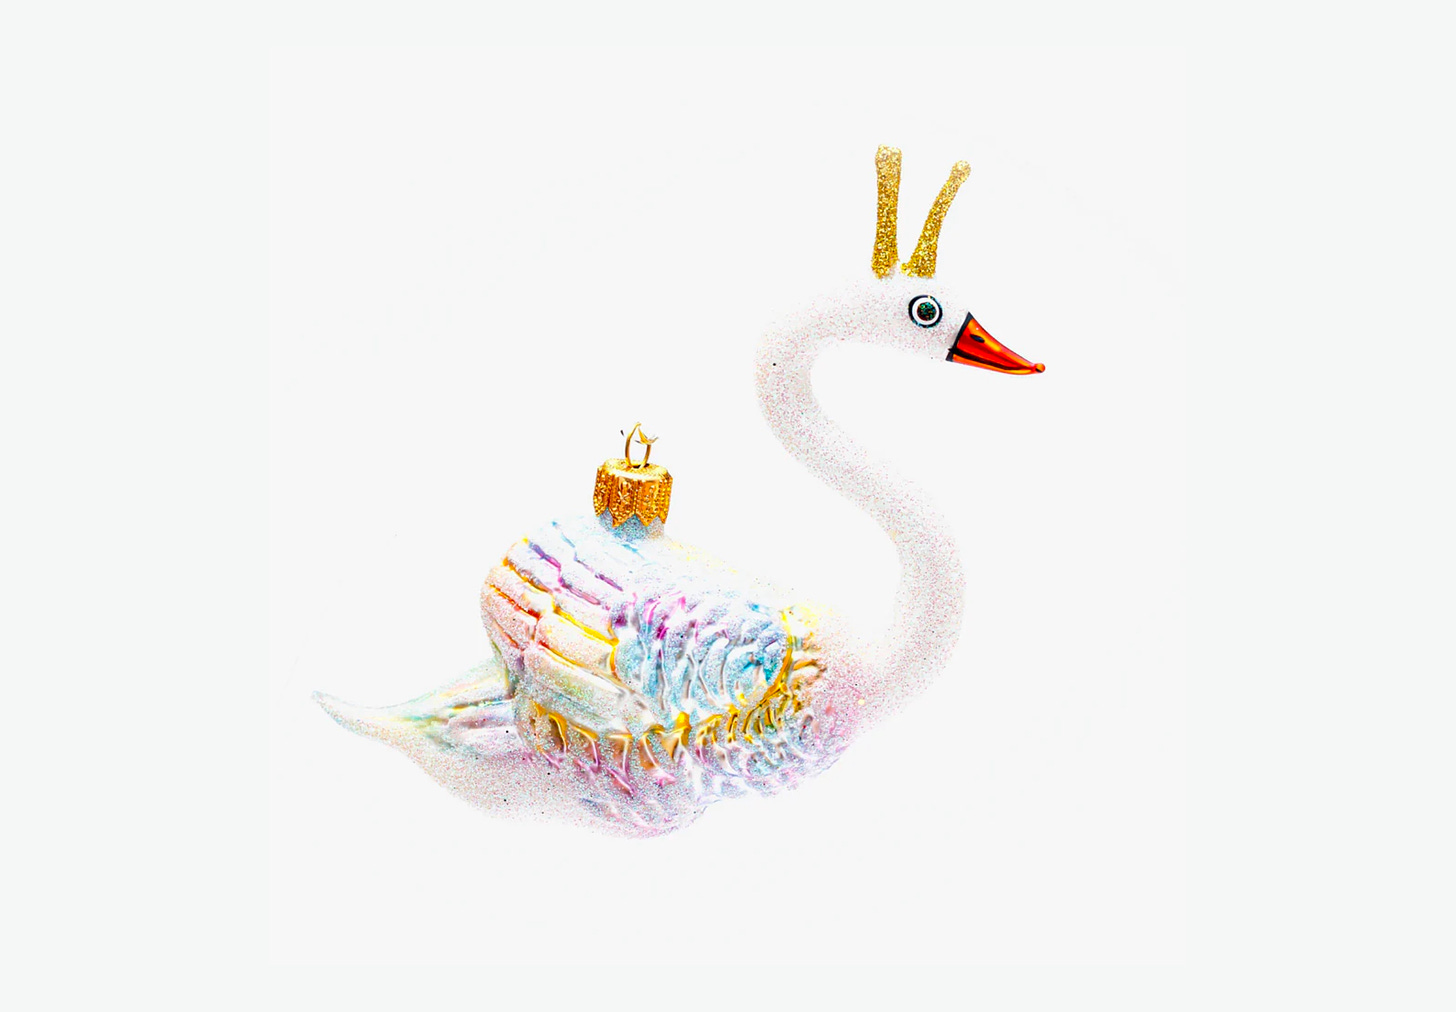 Product shot of a glittery blown-glass swan ornament that is clearly haunted. The swan’s eye is large, round, and alarmed. On its head are two sparkly gold protuberances that we’re supposed to believe are a crown somehow.